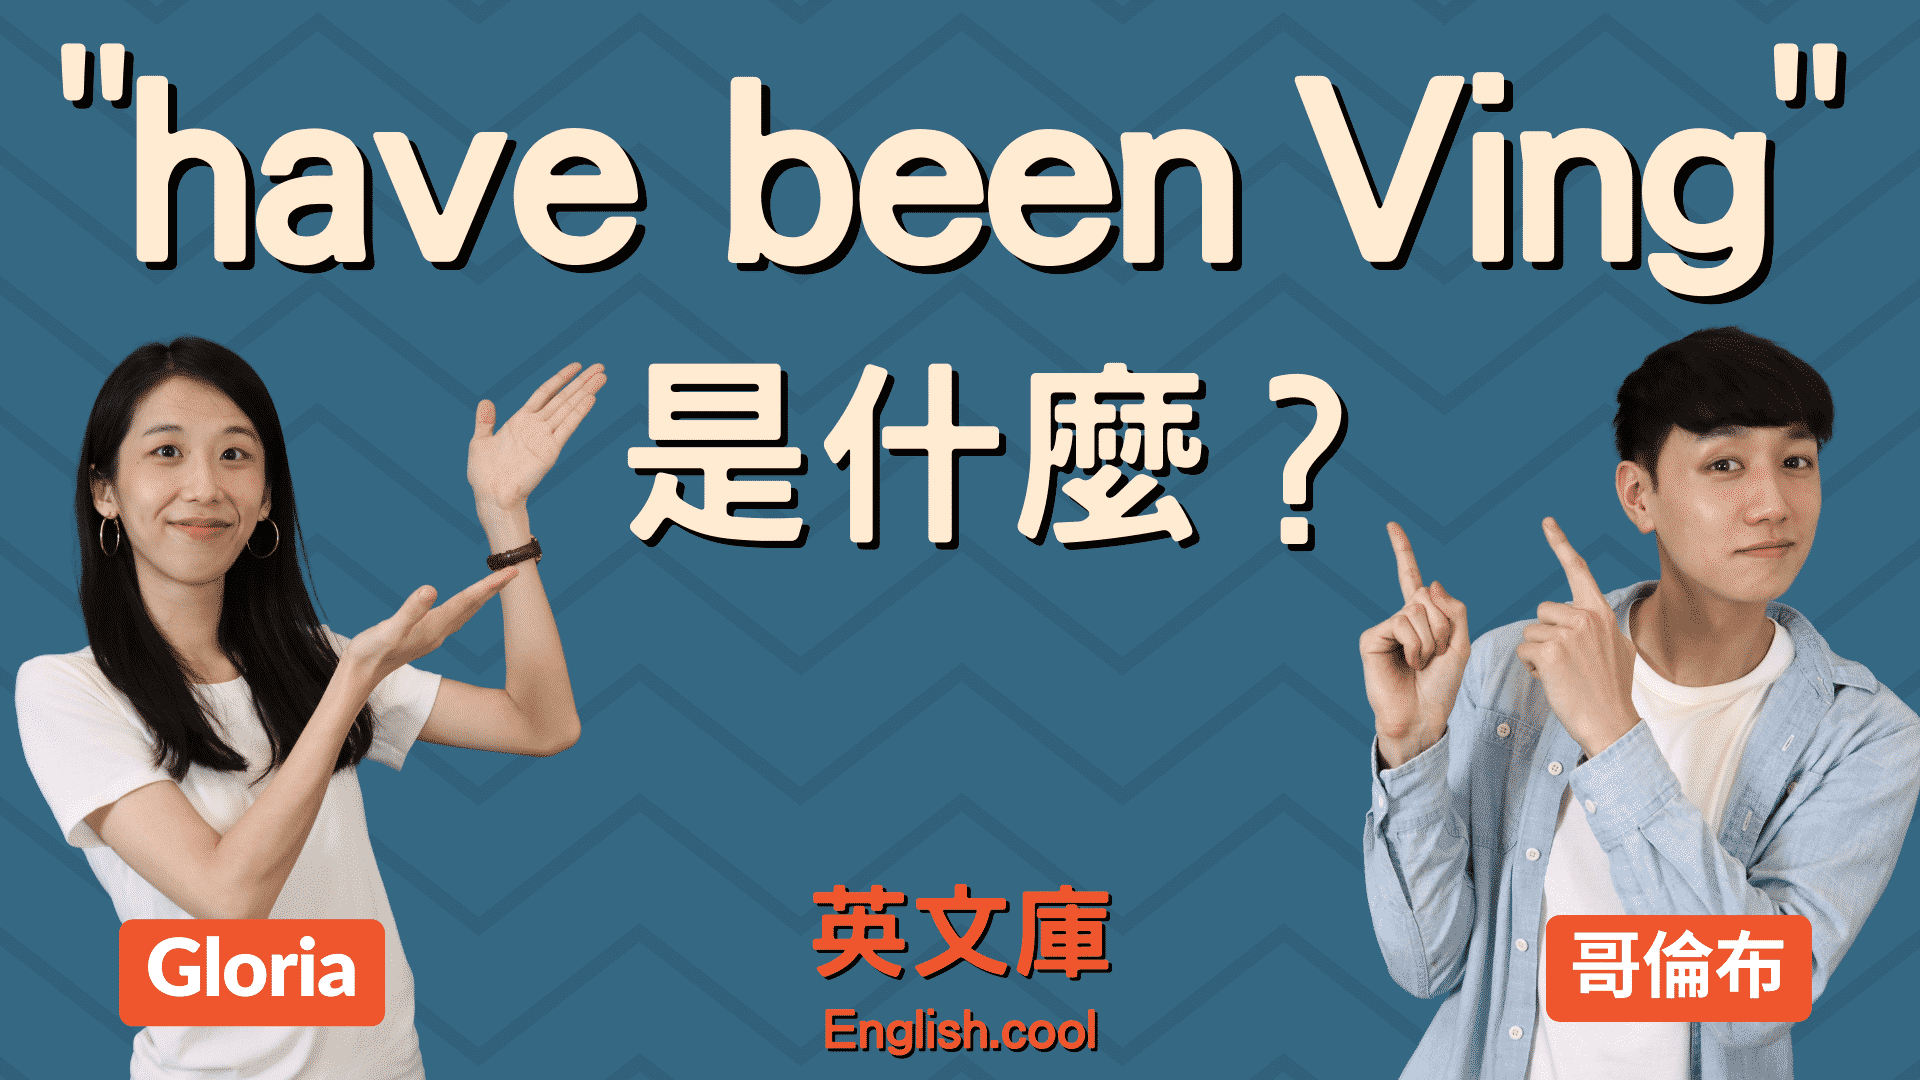 You are currently viewing 【文法】“have been +Ving” 是什麼意思？怎麼用？